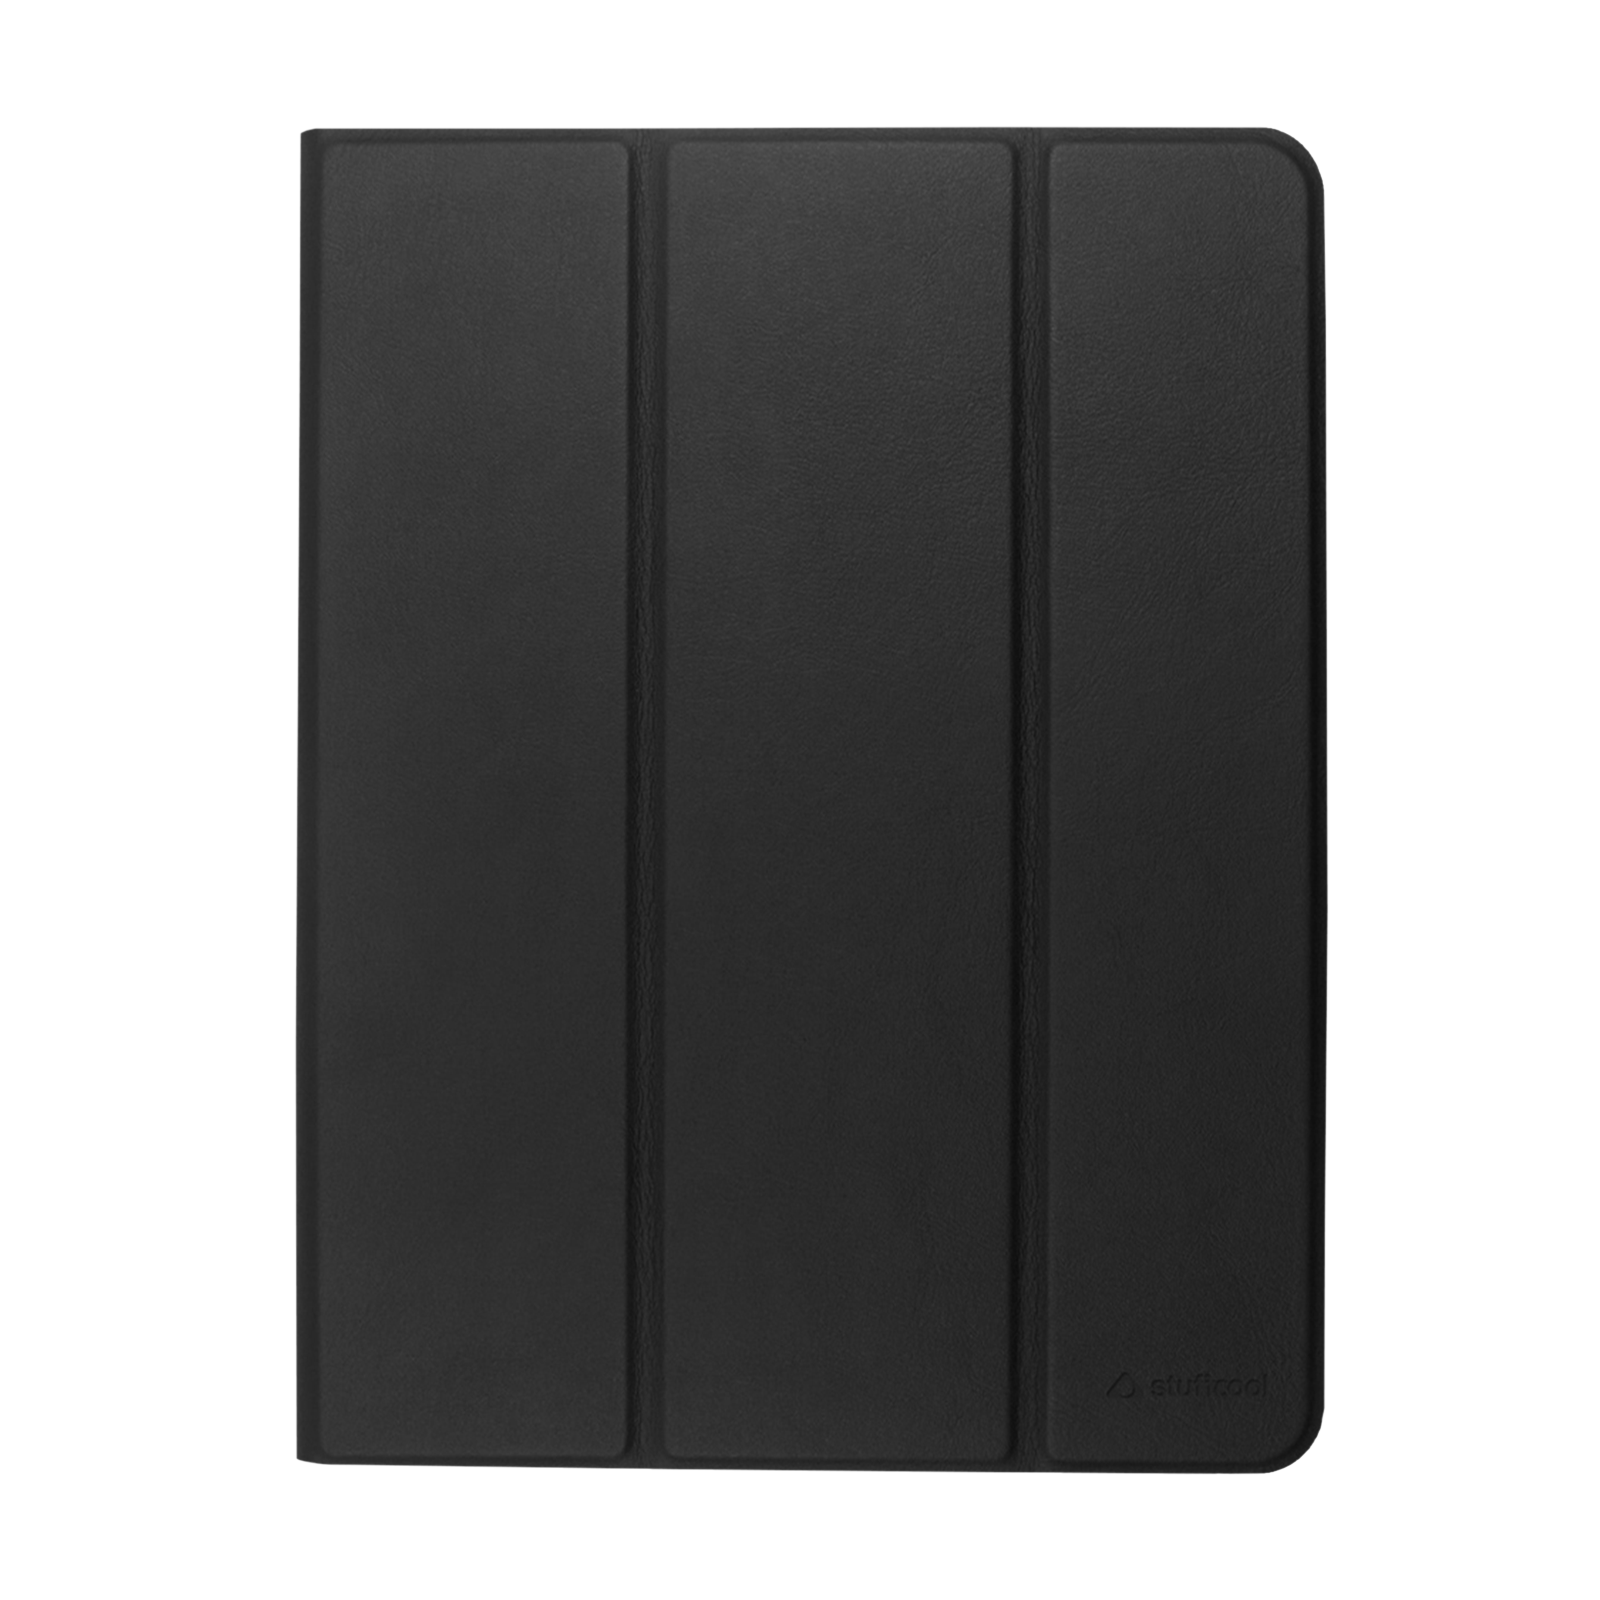 Stuffcool Flex Faux Leather Flip Cover for Apple iPad 10.2 Inch (9th Gen) (Built-in Pencil Holder, Black)